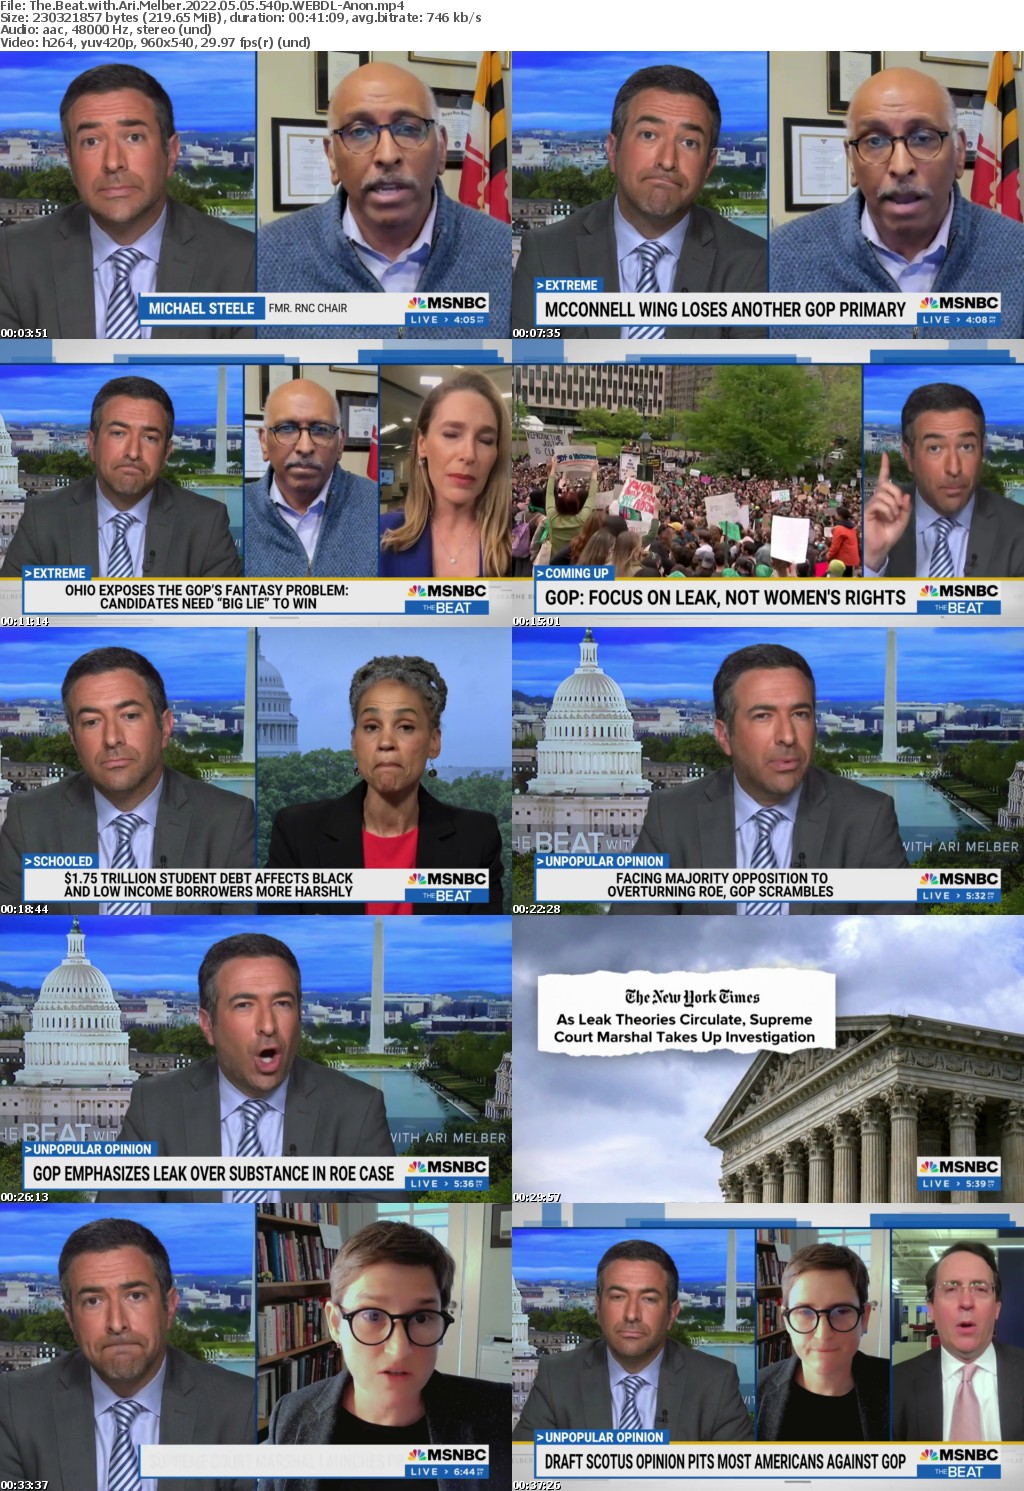 The Beat with Ari Melber 2022 05 05 540p WEBDL-Anon